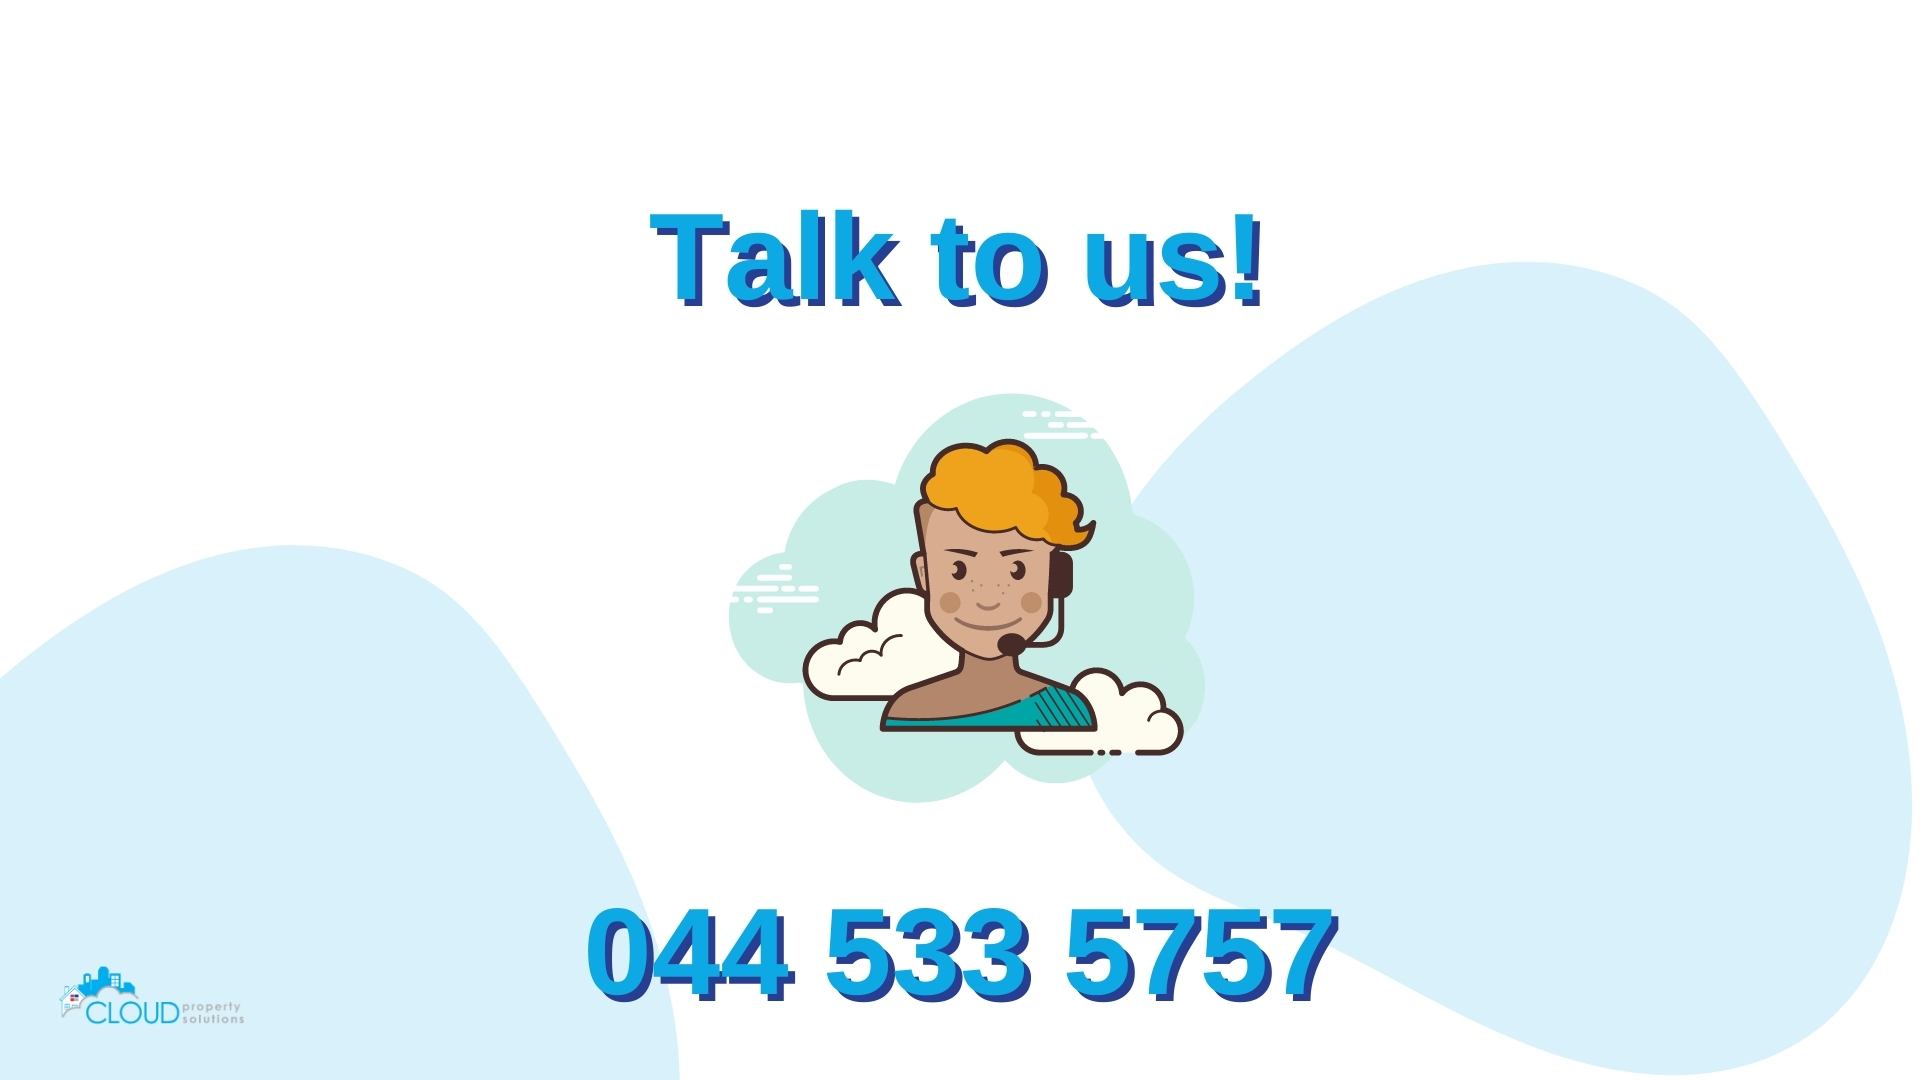 Get in touch today! 044 533 5757